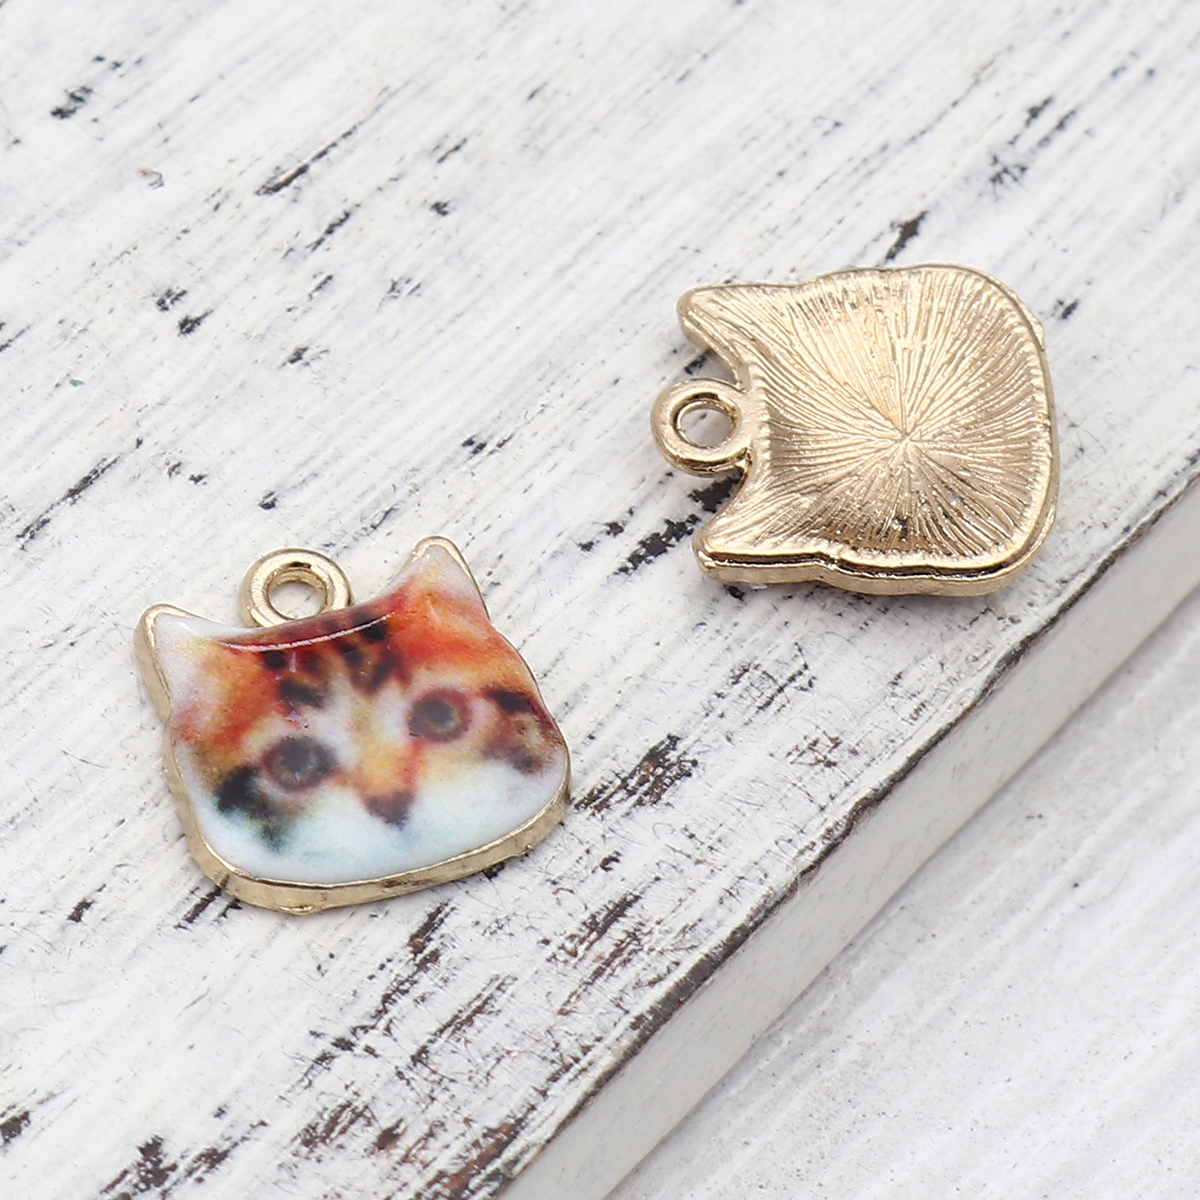 Picture of Zinc Based Alloy Charms Cat Animal Gold Plated White & Orange Enamel 13mm x 12mm, 10 PCs